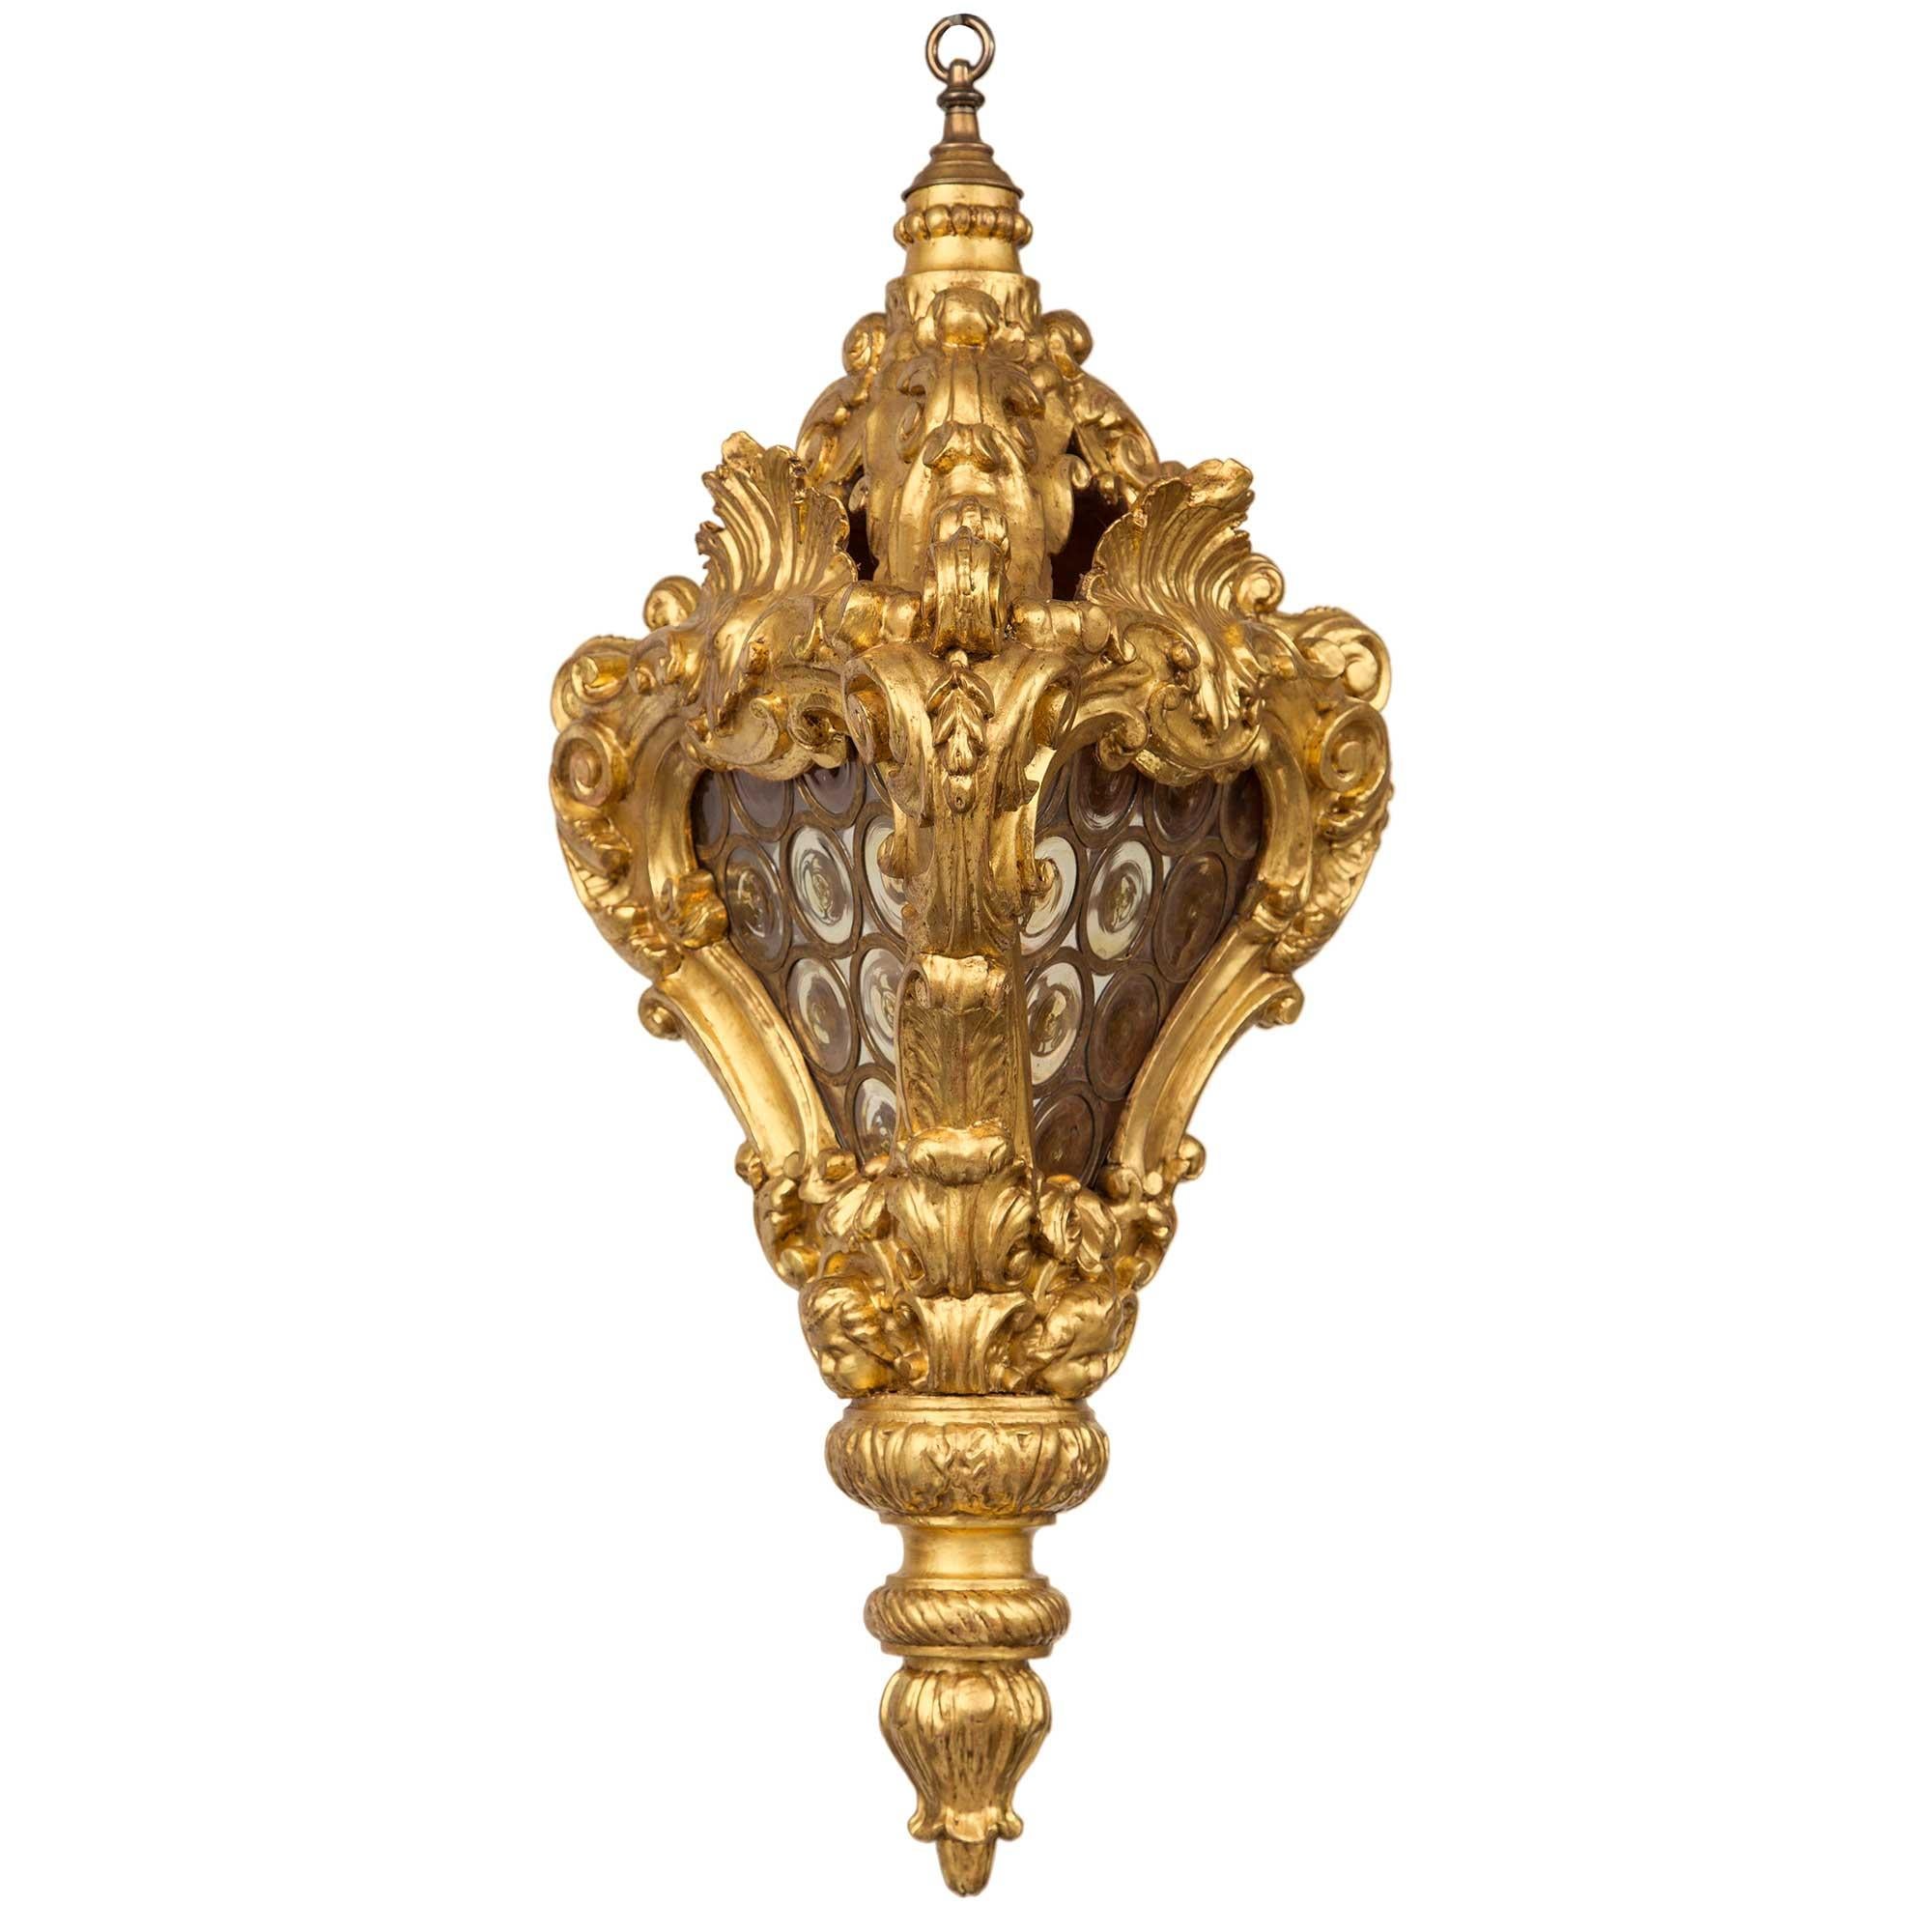 A striking and most unique Italian 18th century Baroque period giltwood and glass lantern. The lantern is centered by a bottom foliate finial with a wrap around twisted design. Above an acanthus leaf border is a charming cherub's head amidst rich